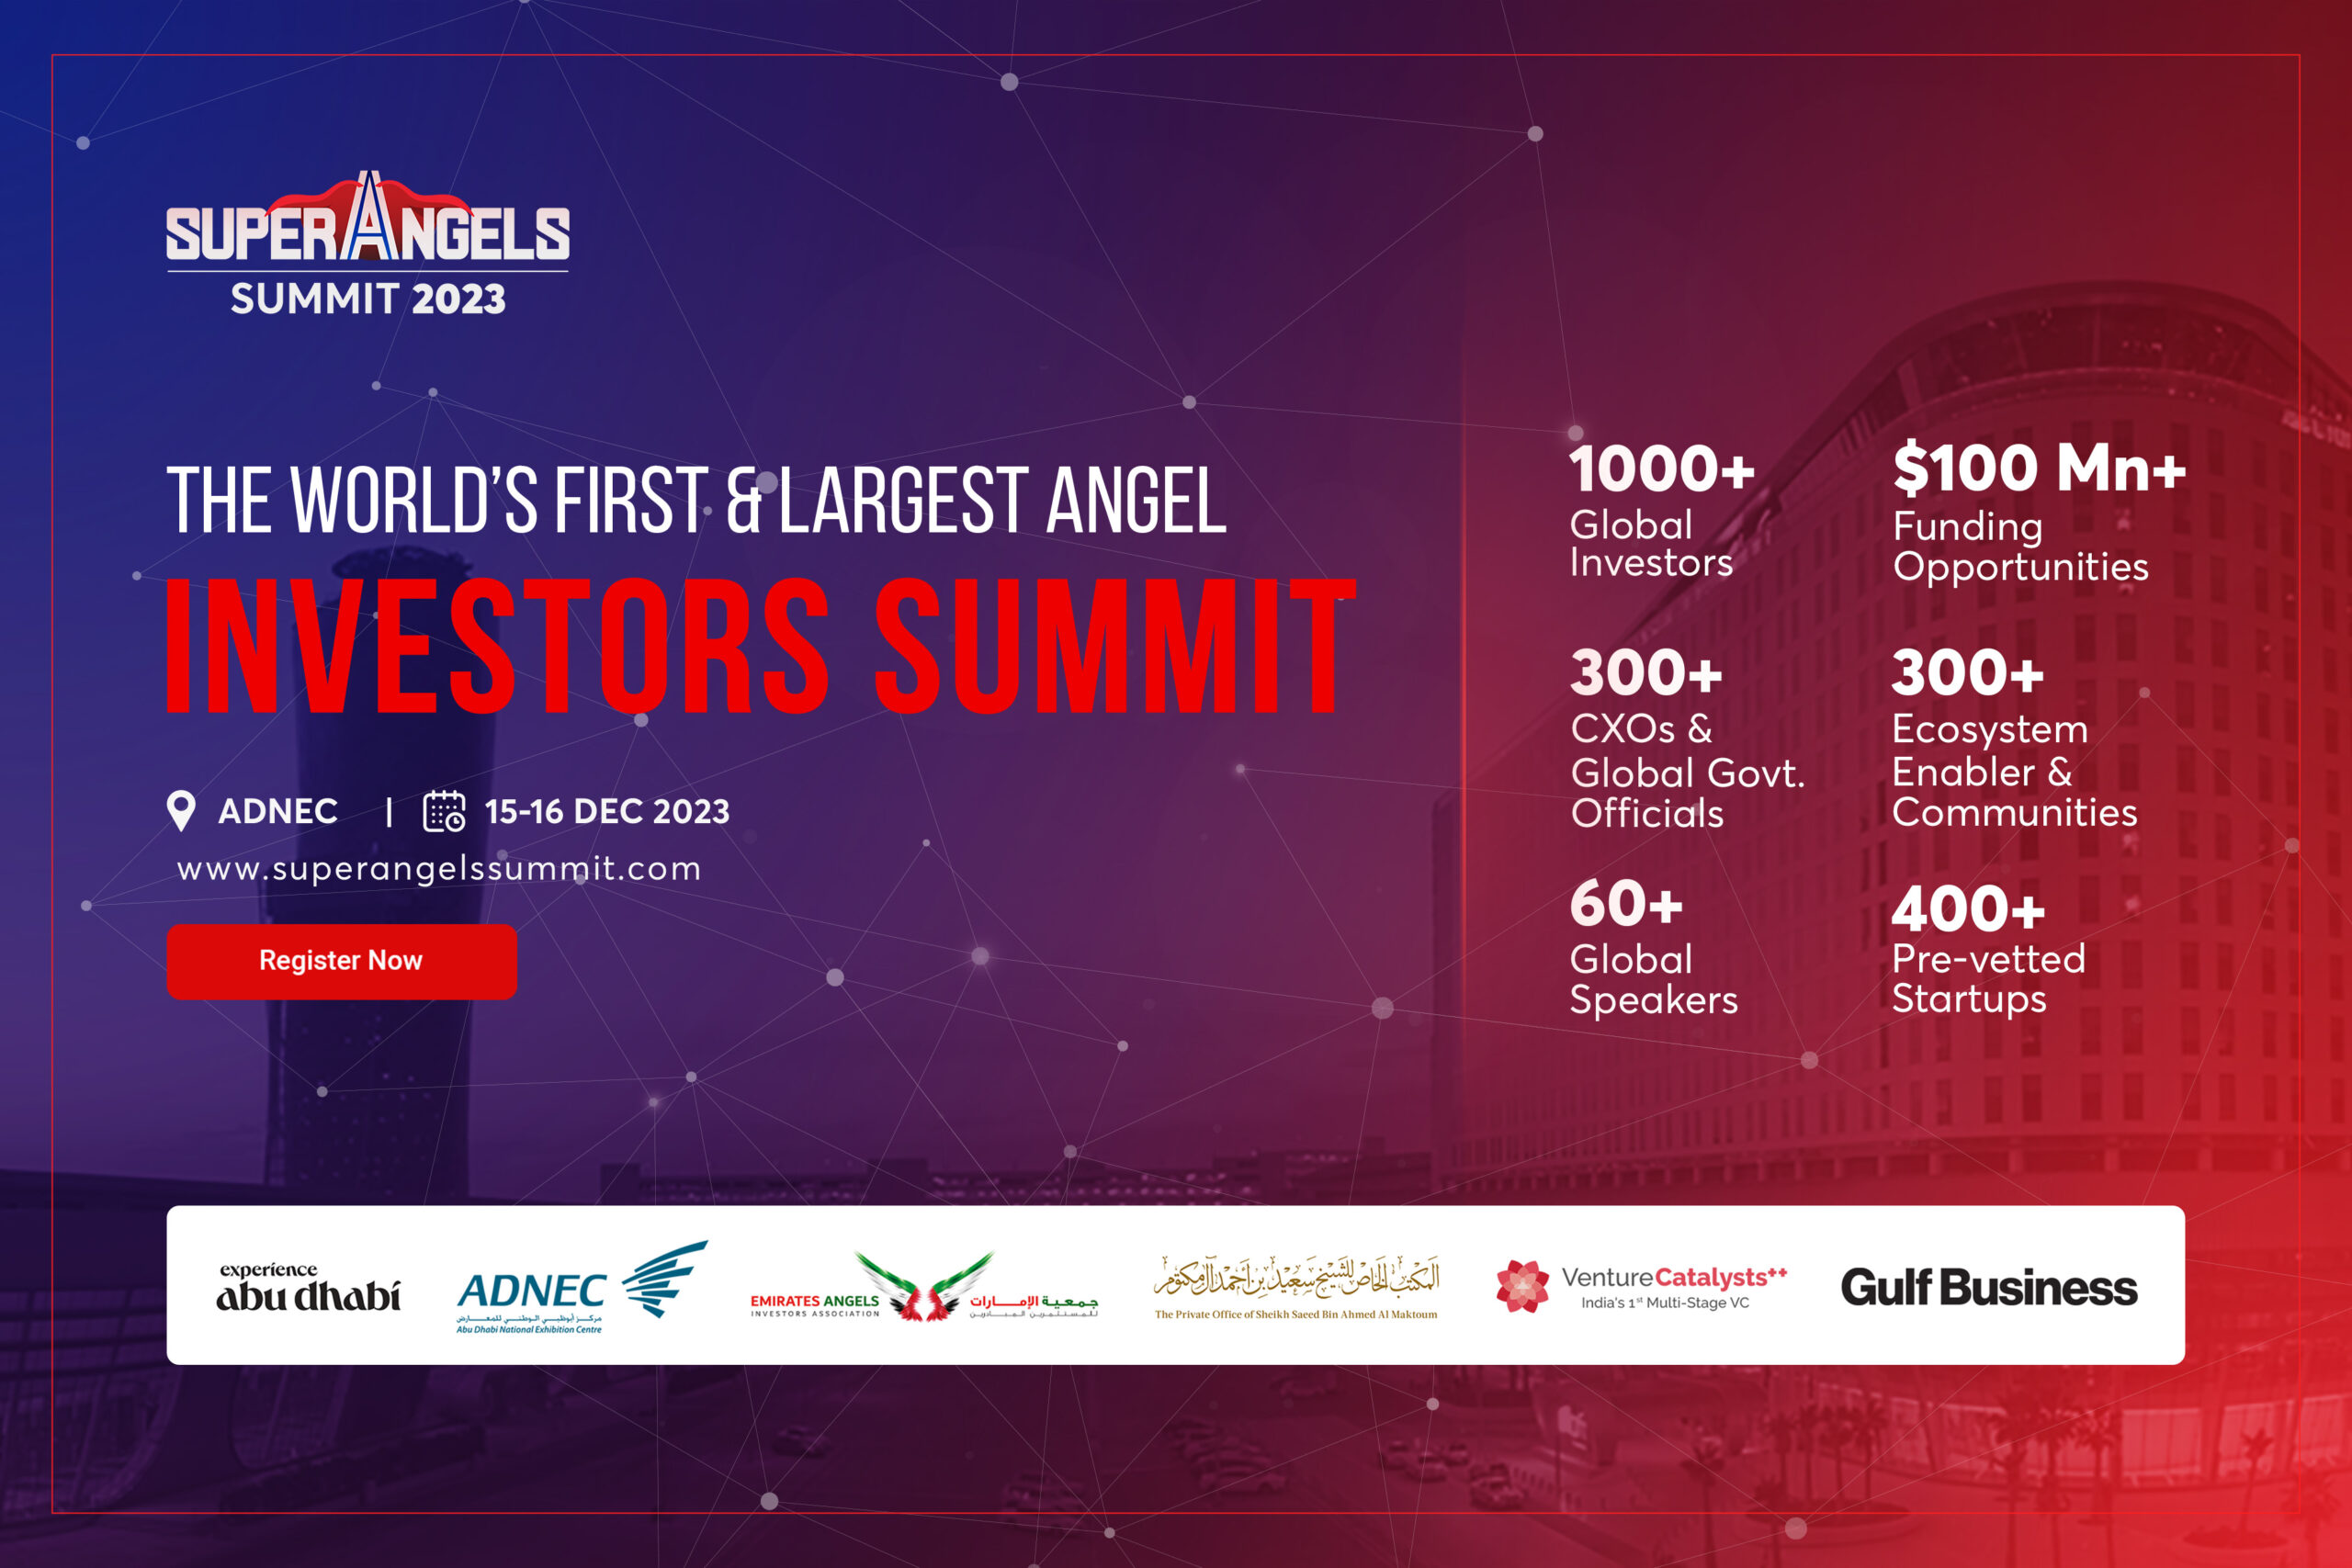 SuperAngels Summit: Abu Dhabi to host two-day investor conference on 15-16 Dec 2023